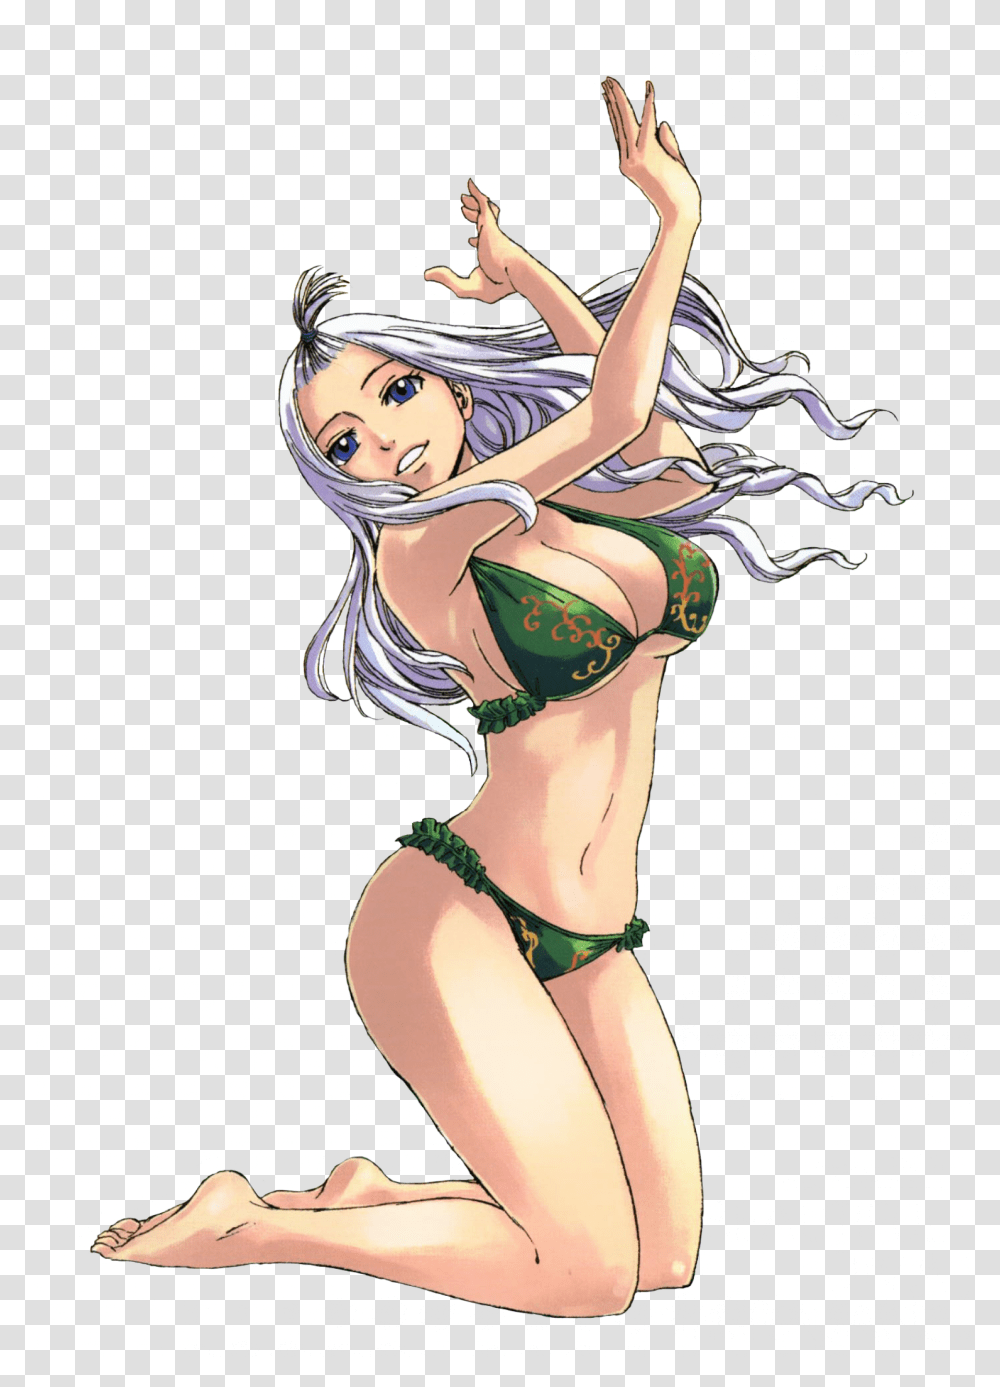 Download Hd Anime Who Is The Sexiest Girl In Fairy Tail Fairy Tail Mirajane, Person, Clothing, Advertisement, Poster Transparent Png